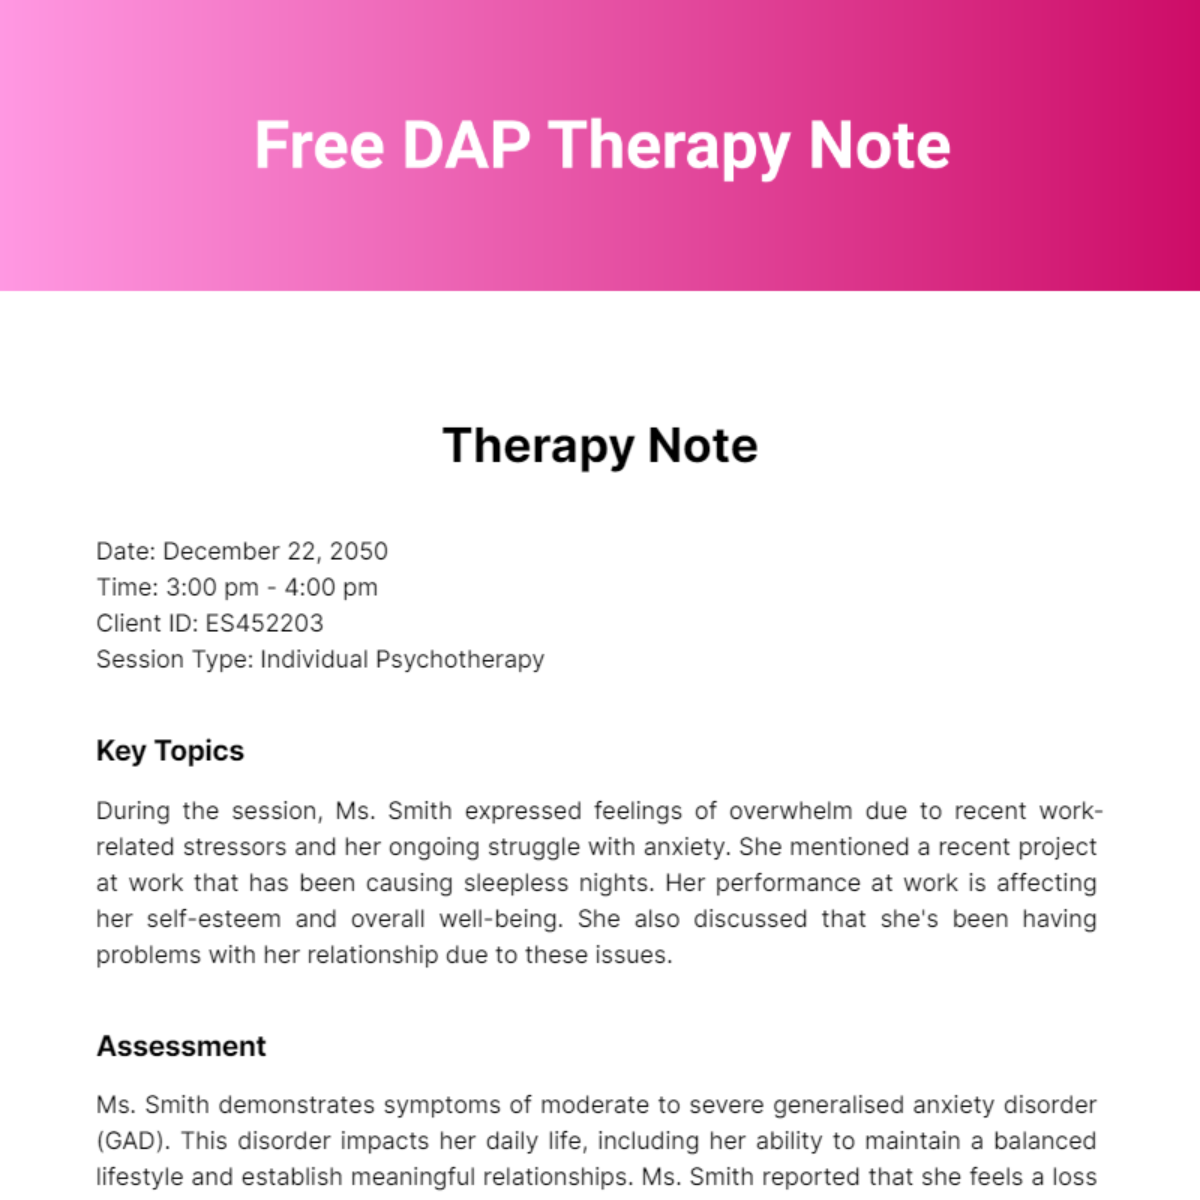 Free DAP Therapy Note Template